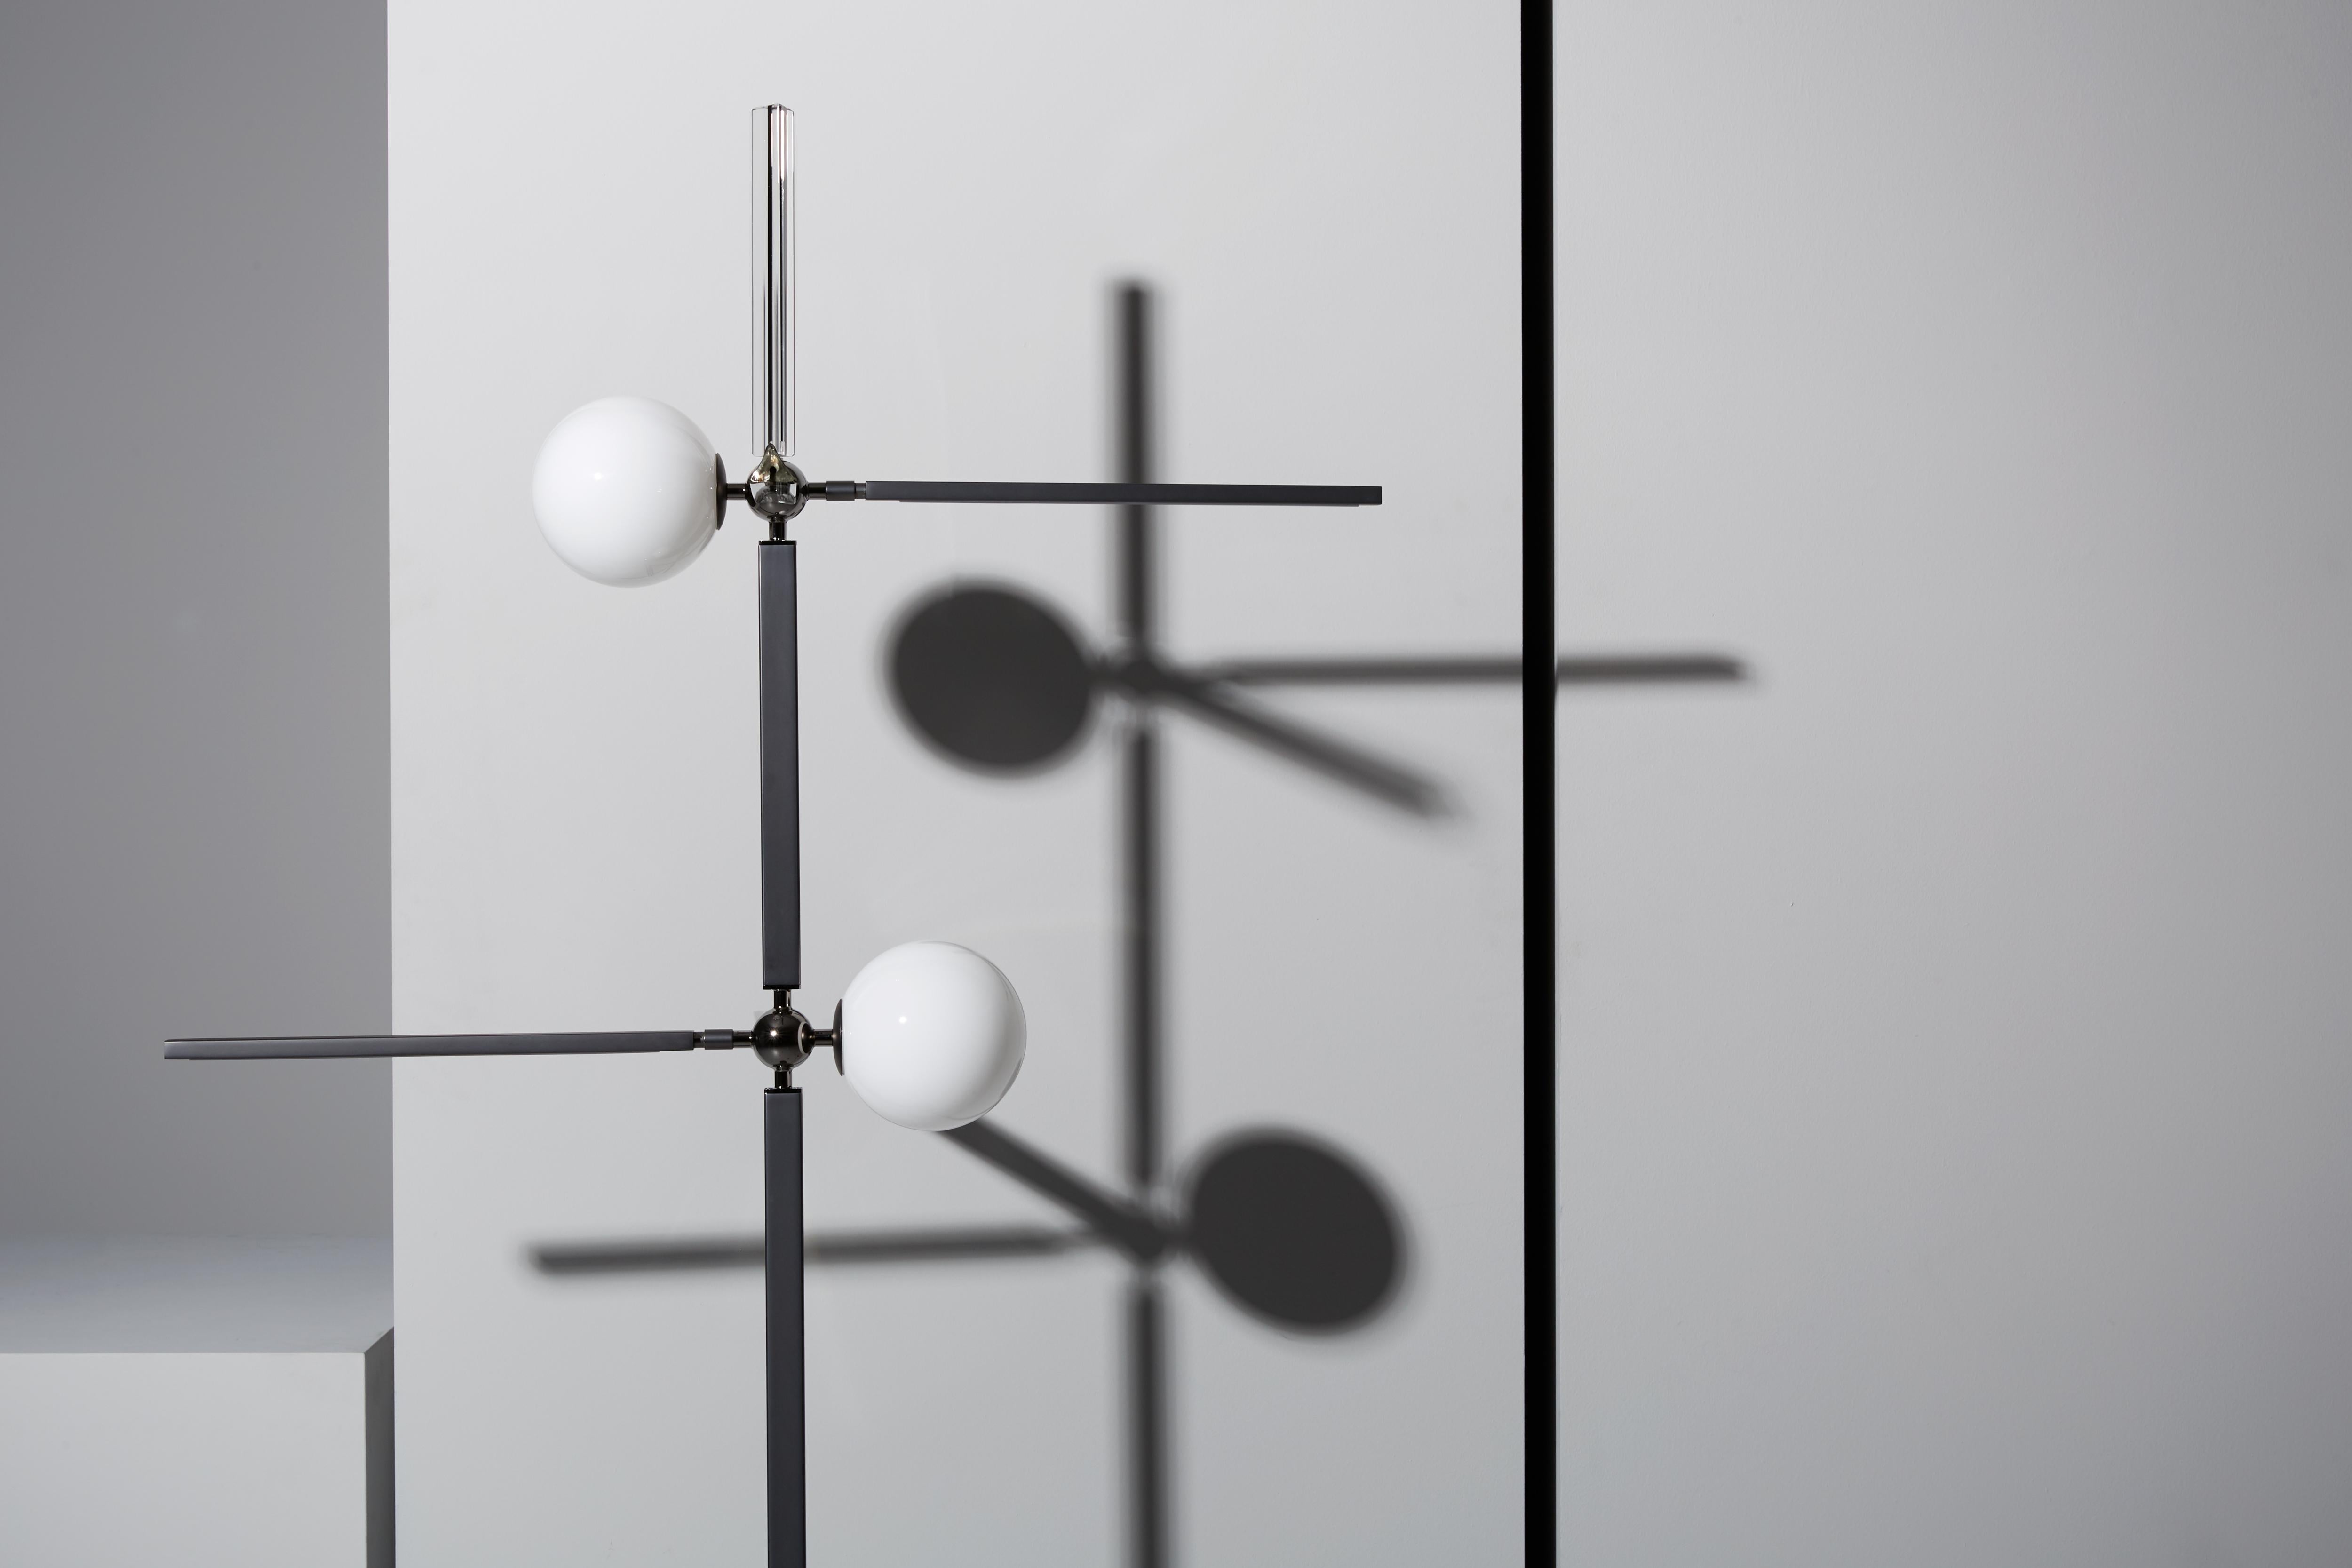 Floor lamp with diffused light. Matte black nickel structure with polished black nickel spheres. Crystal, amber and smoke grey Murano blown glass trihedrons. White Murano blown glass diffusers.
Specifications:
Function: Floor
Location: